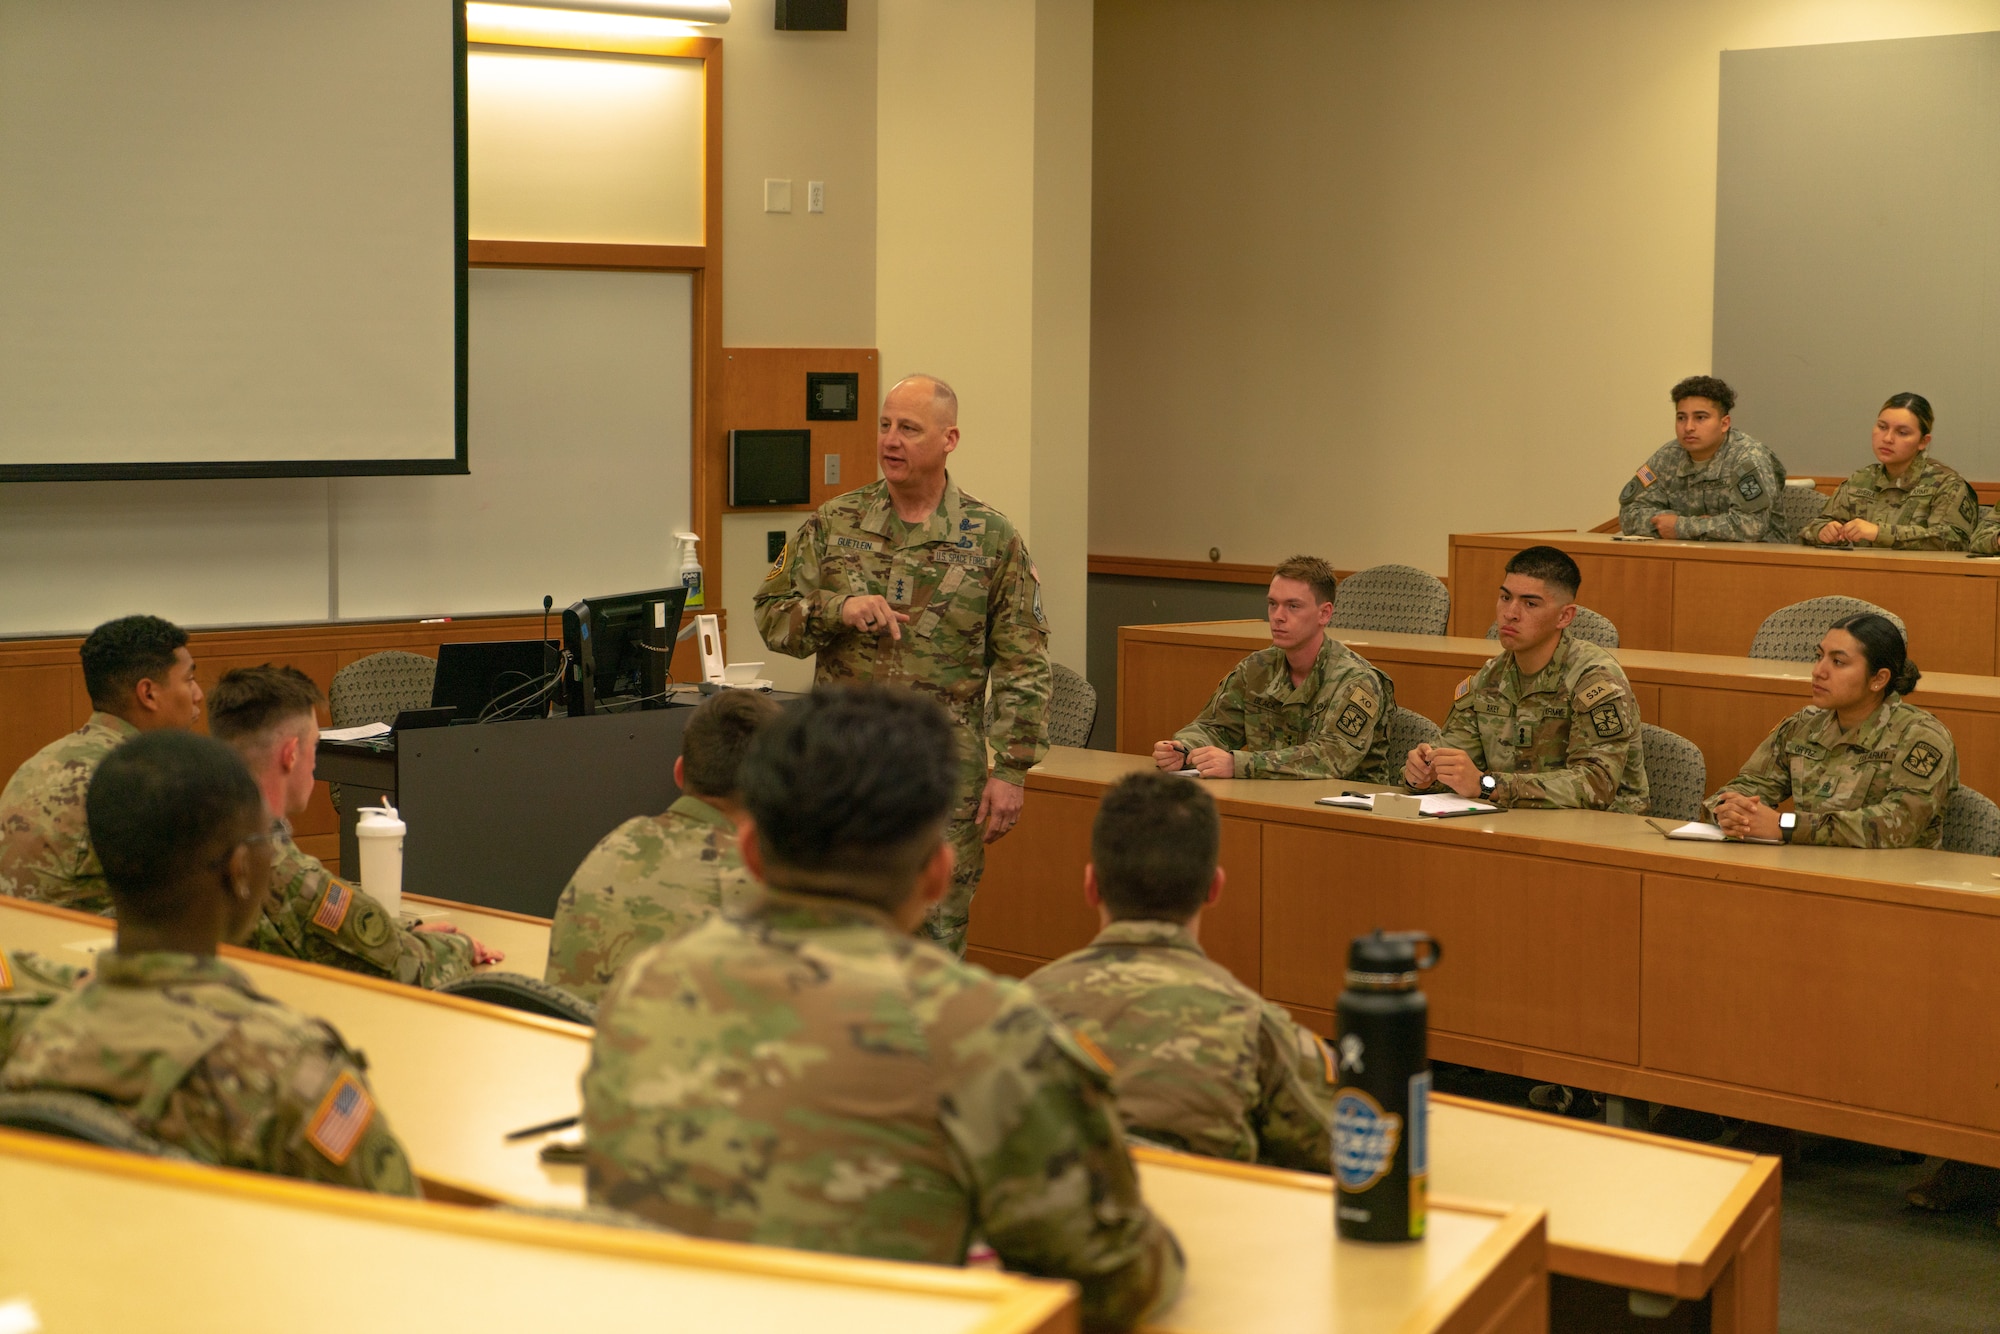 University of Oregon Army ROTC cadets listen as Lt. Gen Michael A. Guetlein shares experience about leadership including the value that unique perspectives and opinions bring to a team.